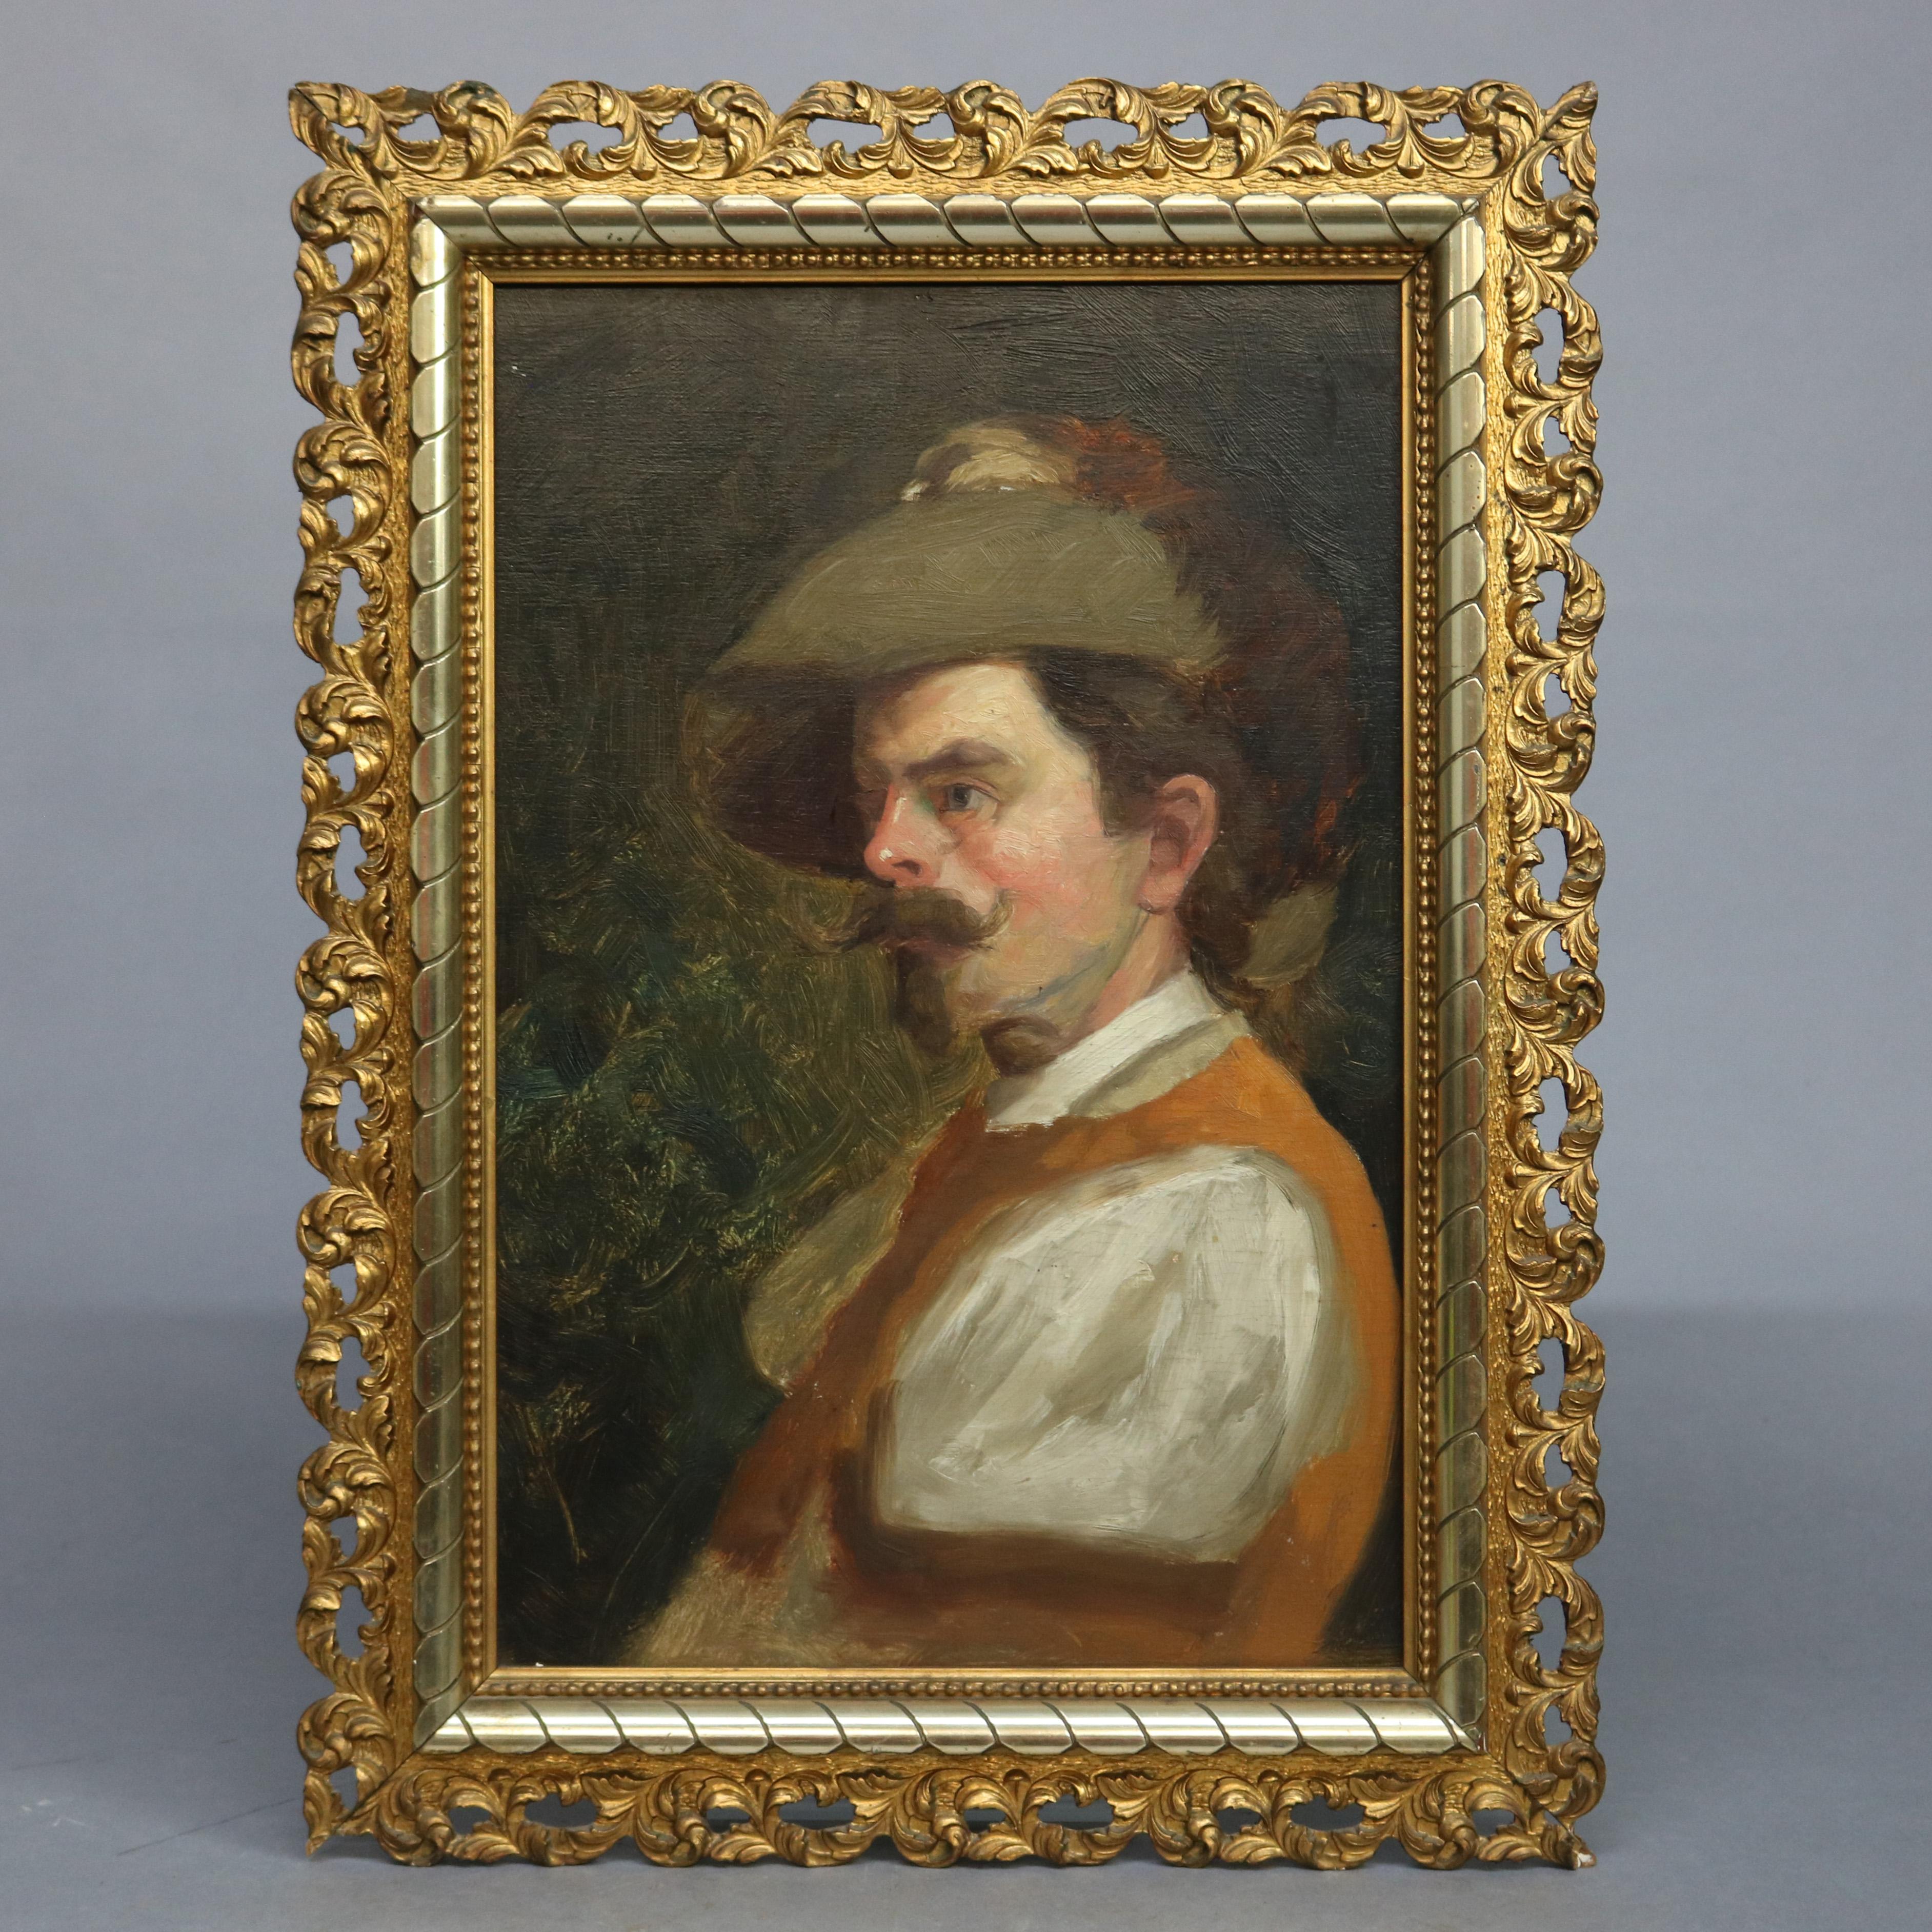 An antique painting offers oil on board portrait of a Musketeer, seated in reticulated foliate giltwood frame, en verso label and signed, c1890

Measures- overall 22.75'' H x 16.5'' W x 2'' D; sight 18'' x 12''.